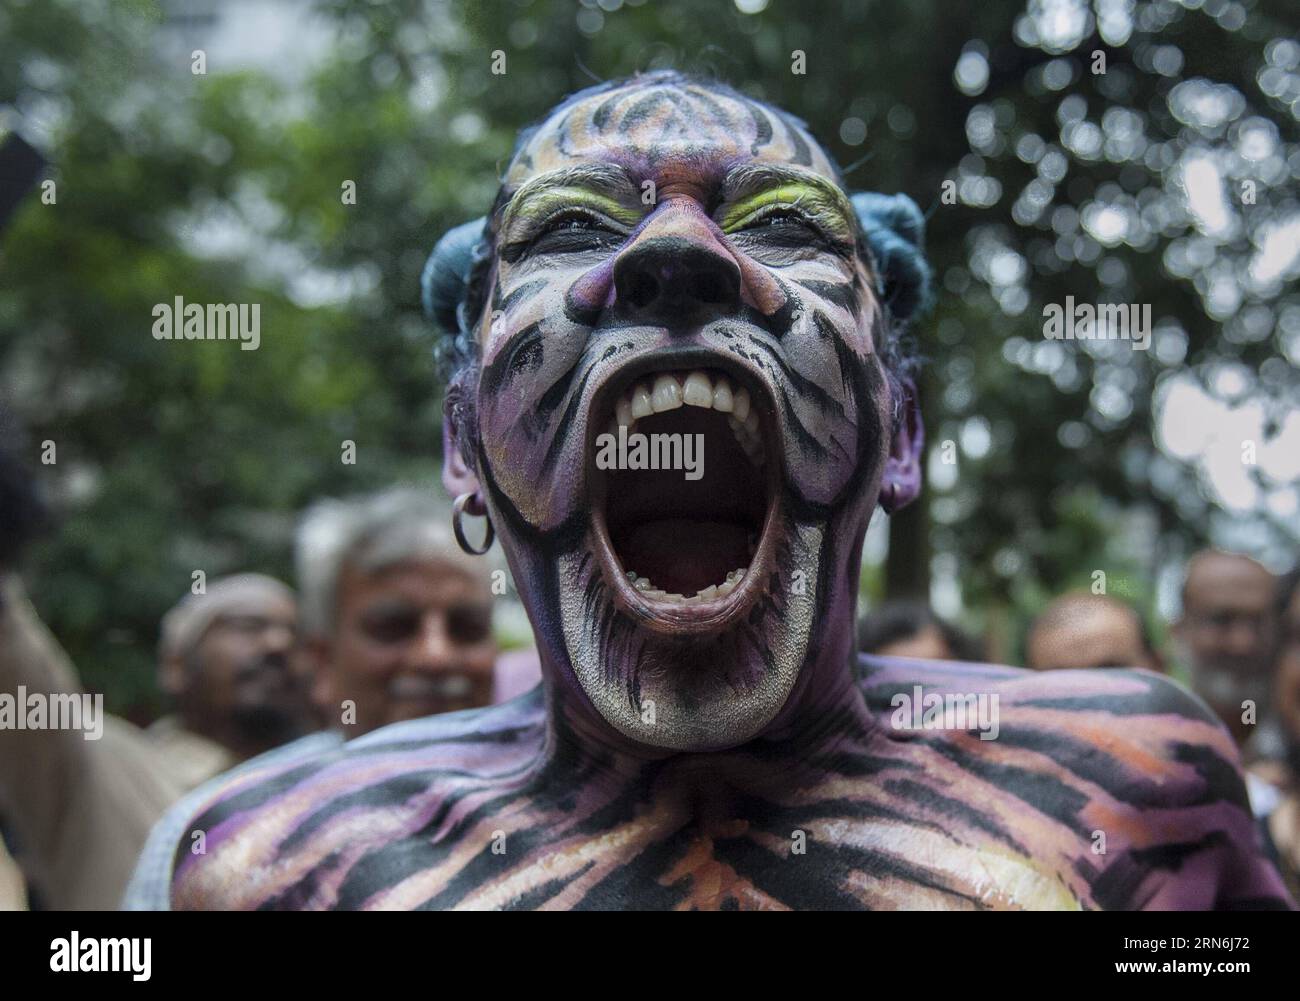 (150729) -- KOLKATA, July 29, 2015 -- An Indian artist painted as tiger performs during a celebration of World Tiger Day in Kolkata, capial of eastern Indian state West Bengal, July 29, 2015. World Tiger Day is annually celebrated on July 29, aiming to raise awareness for tiger conservation. The population of tigers in India is estimated to be around 2,226, which represents a rise of over 30 percent since the last count in 2010, according to the latest census report released in January. ) (djj) INDIA-KOLKATA-WORLD TIGER DAY TumpaxMondal PUBLICATIONxNOTxINxCHN   150729 Kolkata July 29 2015 to I Stock Photo